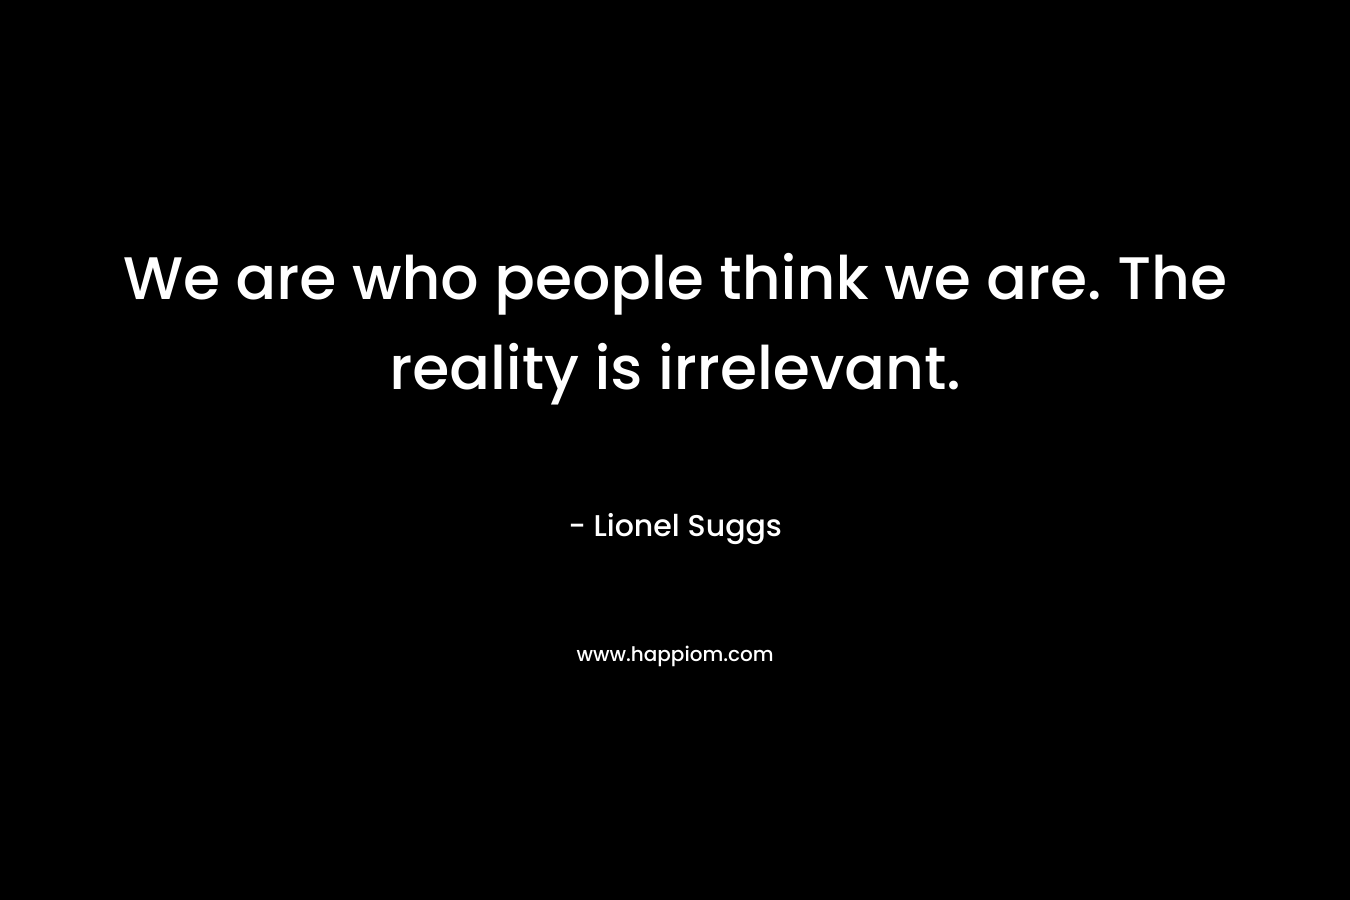 We are who people think we are. The reality is irrelevant. – Lionel Suggs